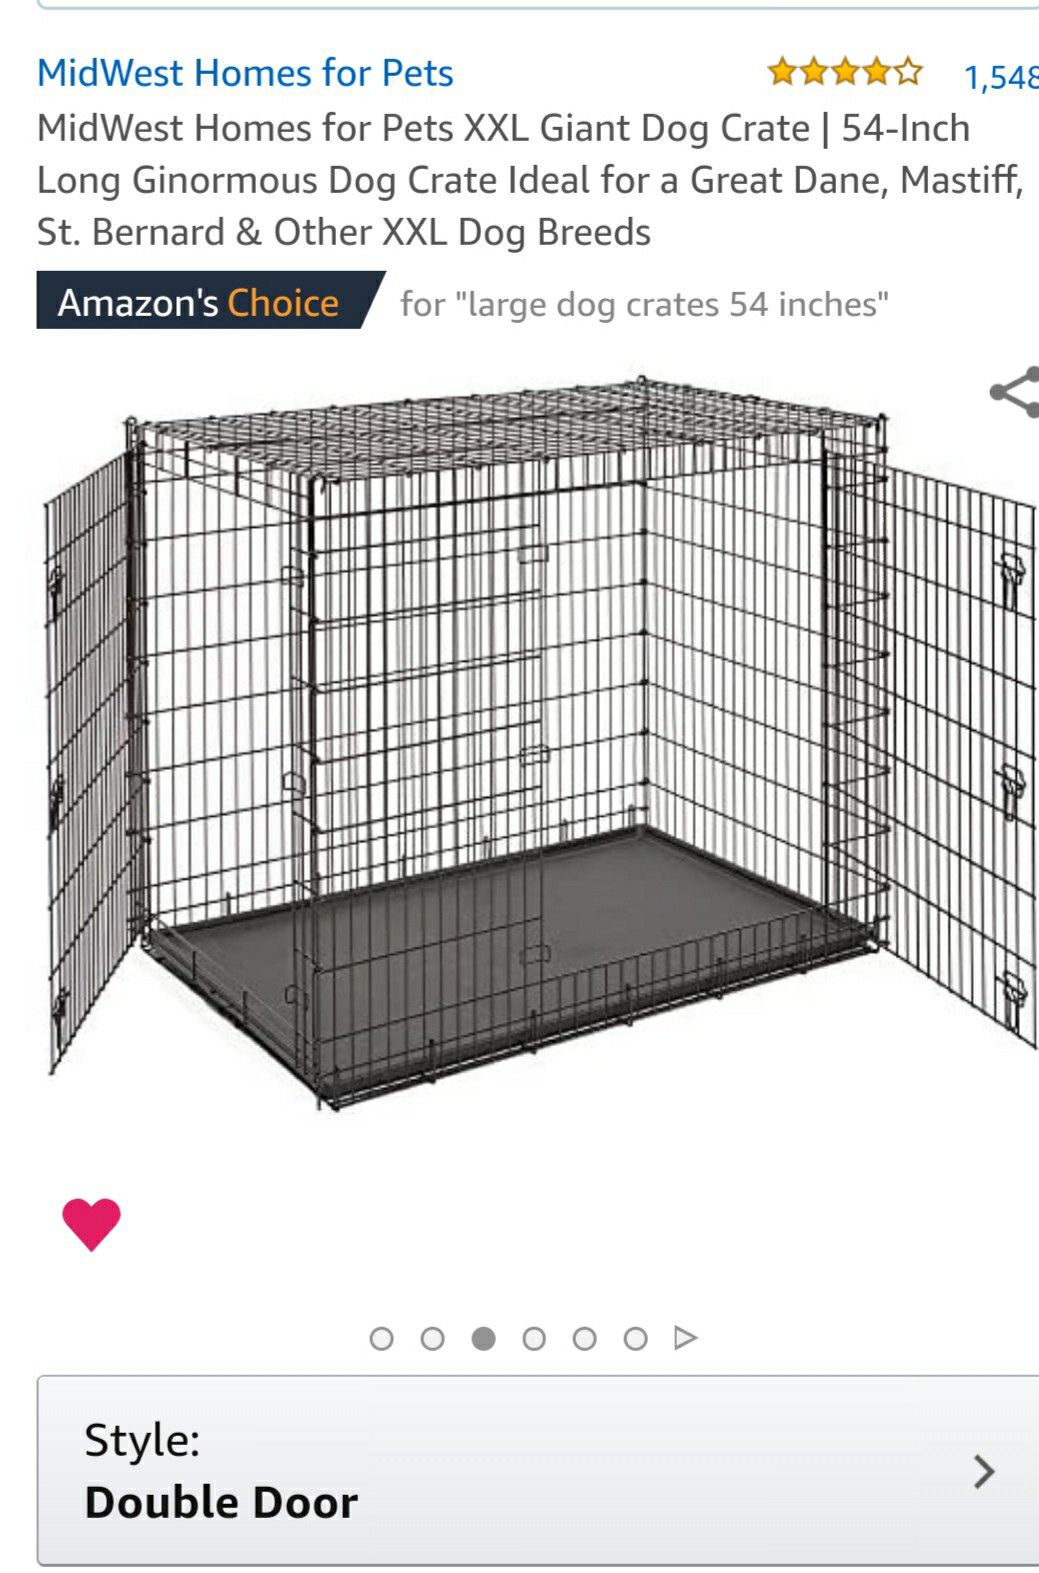 Double sided Iron gate, Large dog crate. Never used